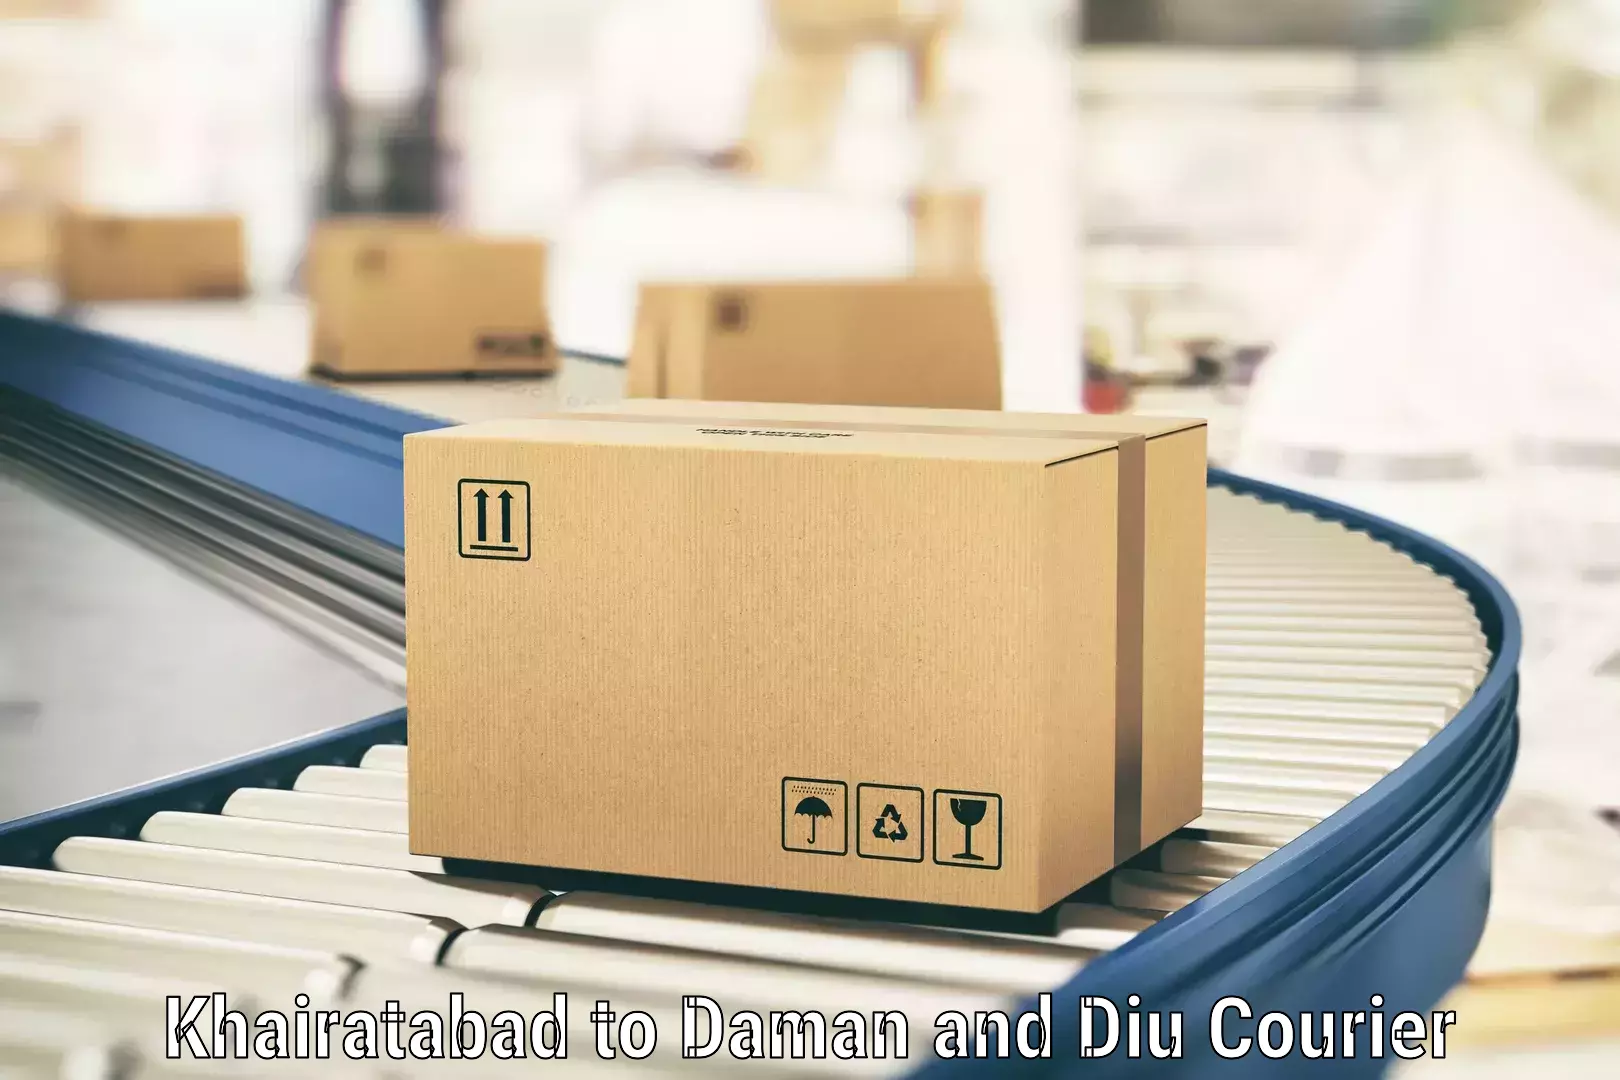 Nationwide shipping coverage Khairatabad to Diu